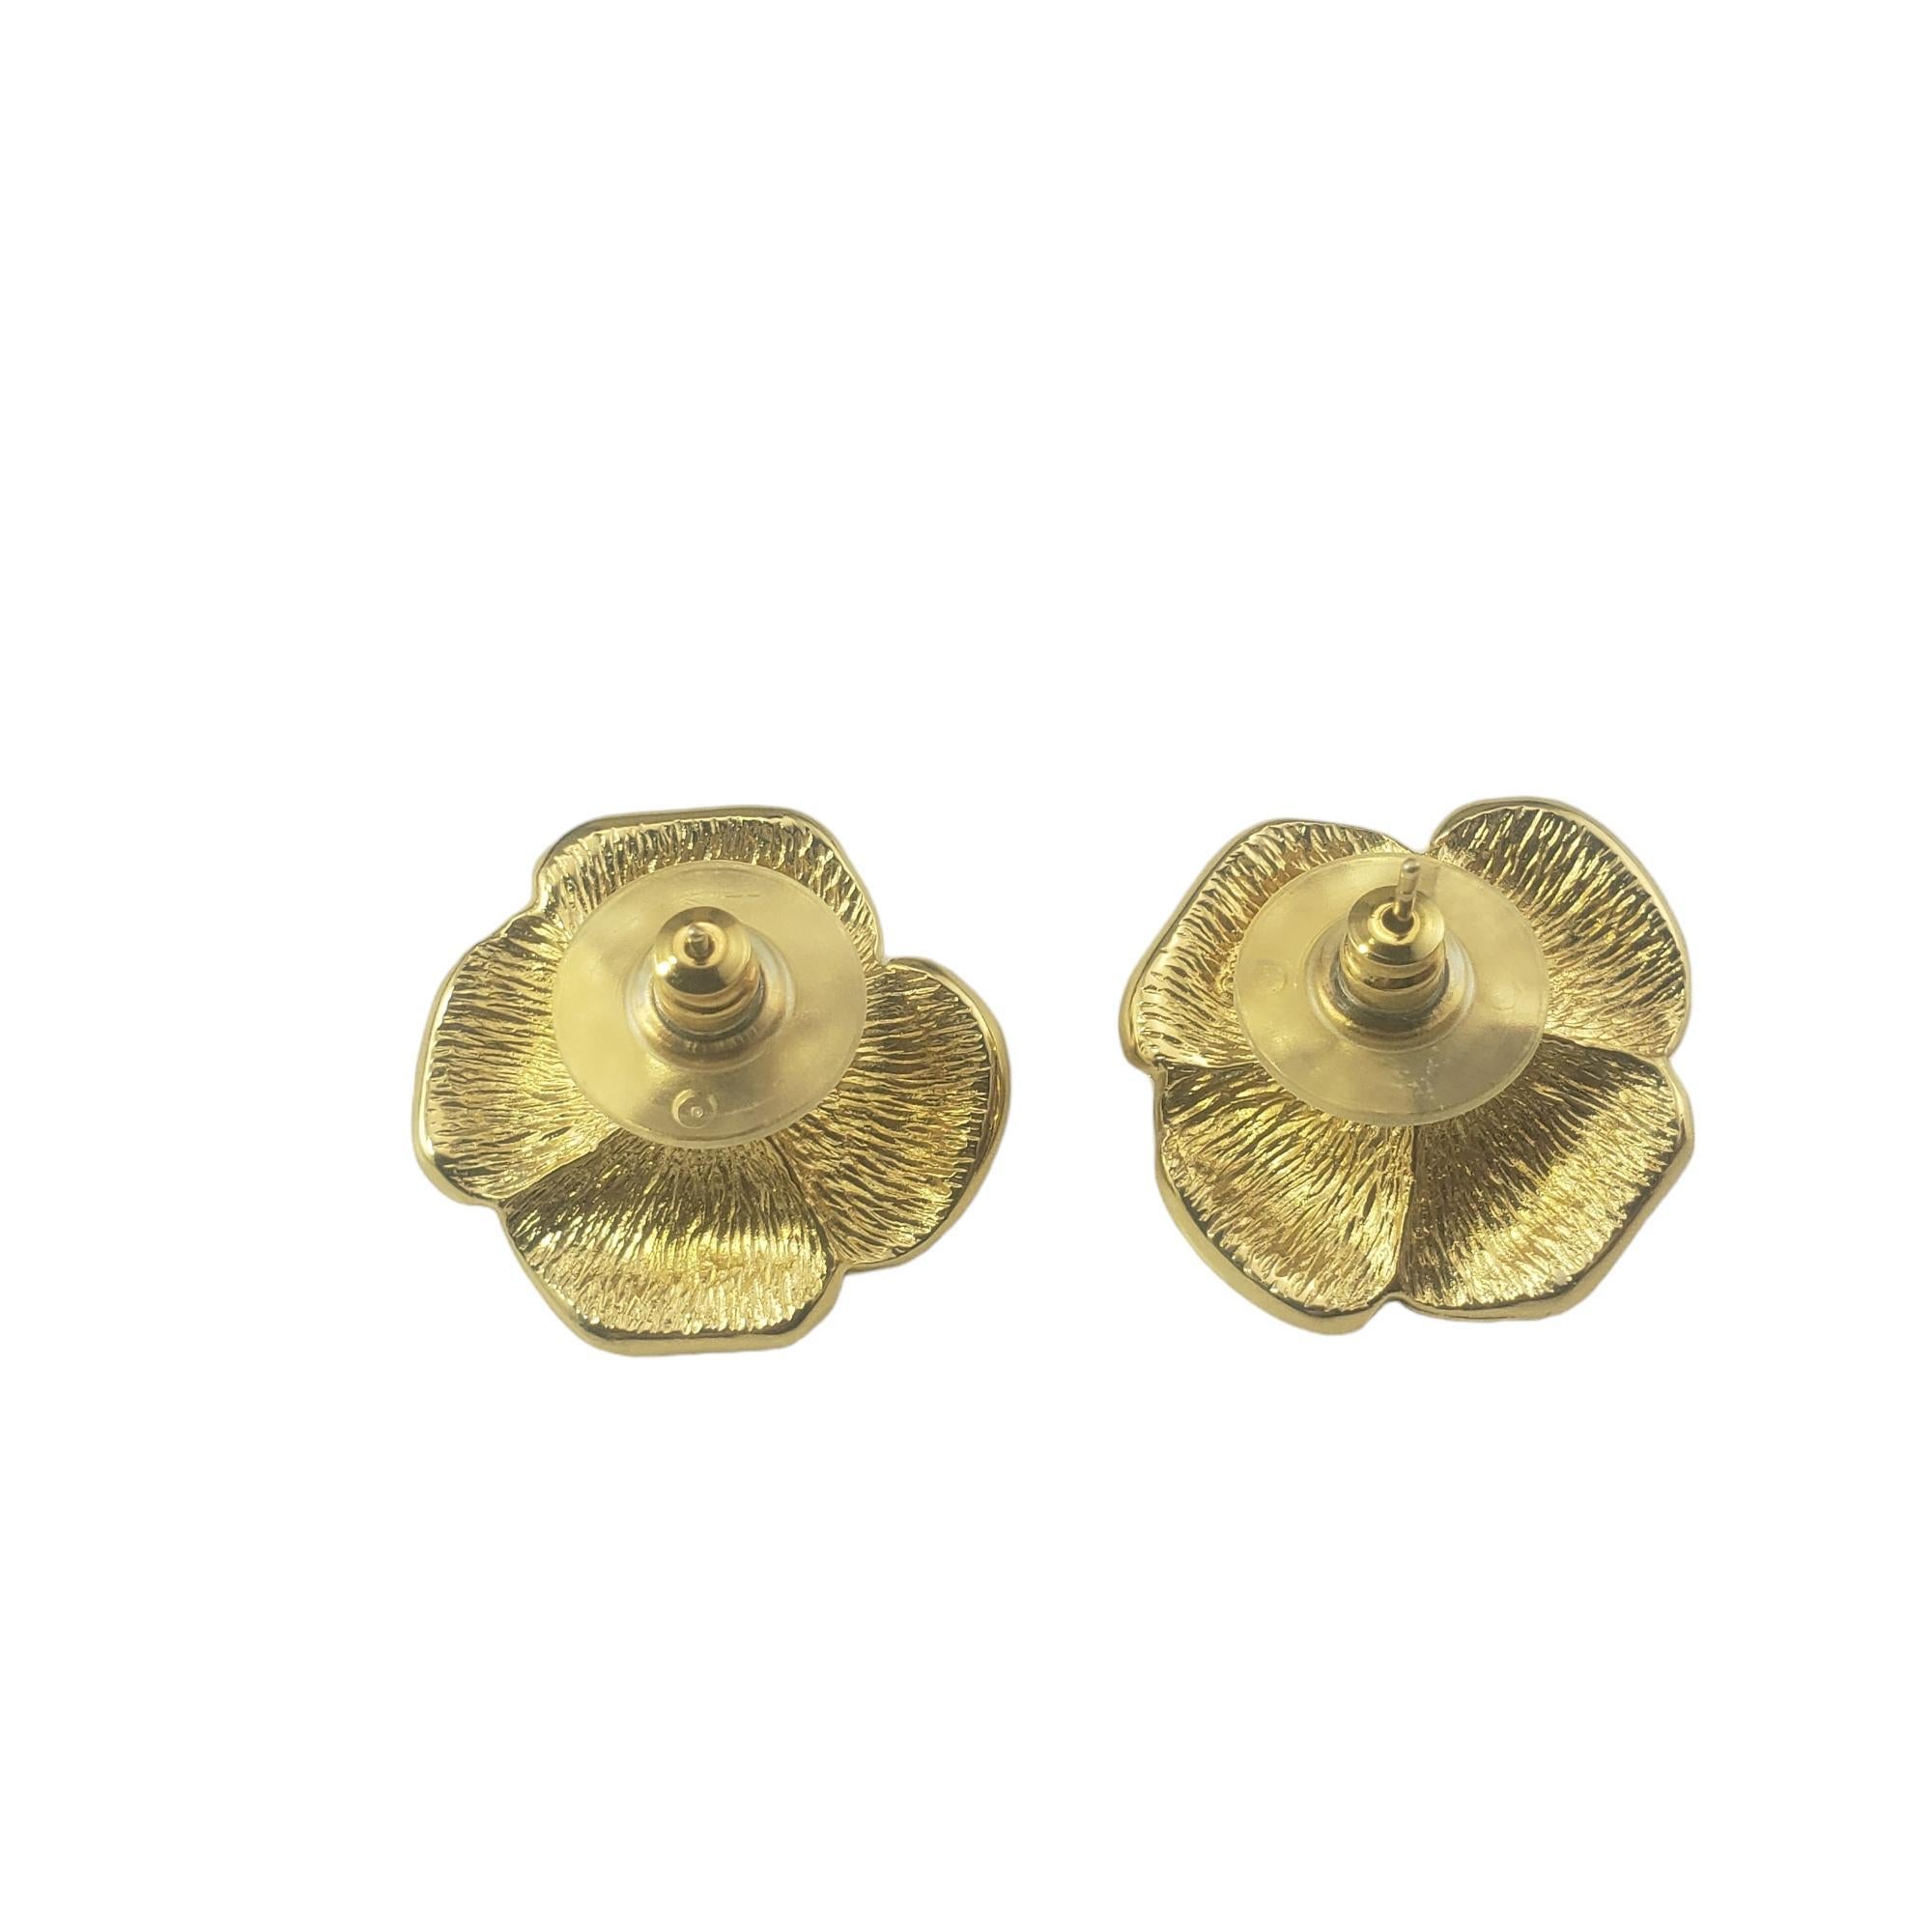 Christian Dior Flower Earrings #16778 In Good Condition For Sale In Washington Depot, CT